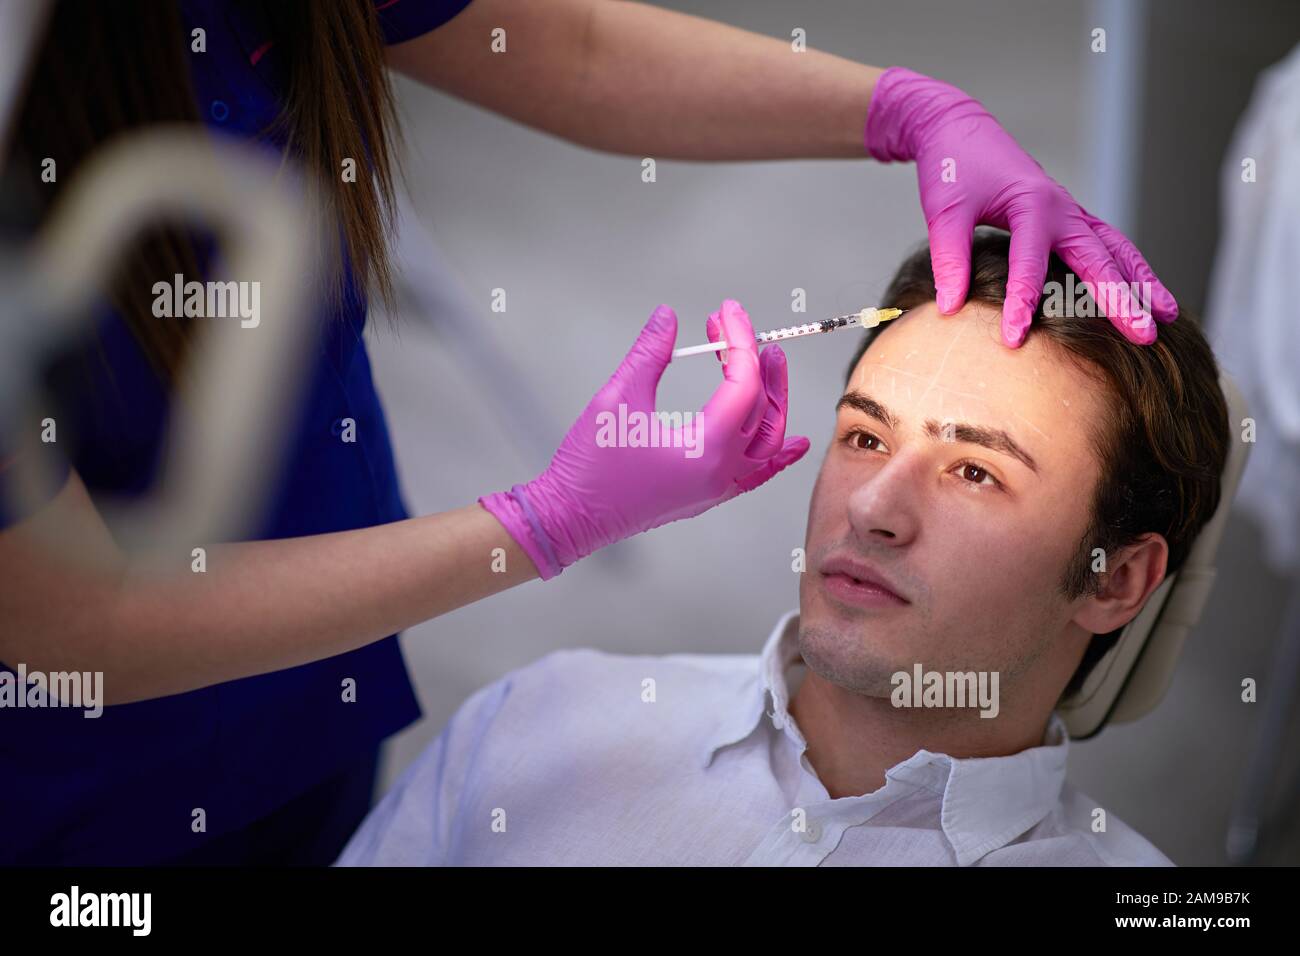 Man having a medical wrinkle treatment with botulinum toxin injection Stock Photo